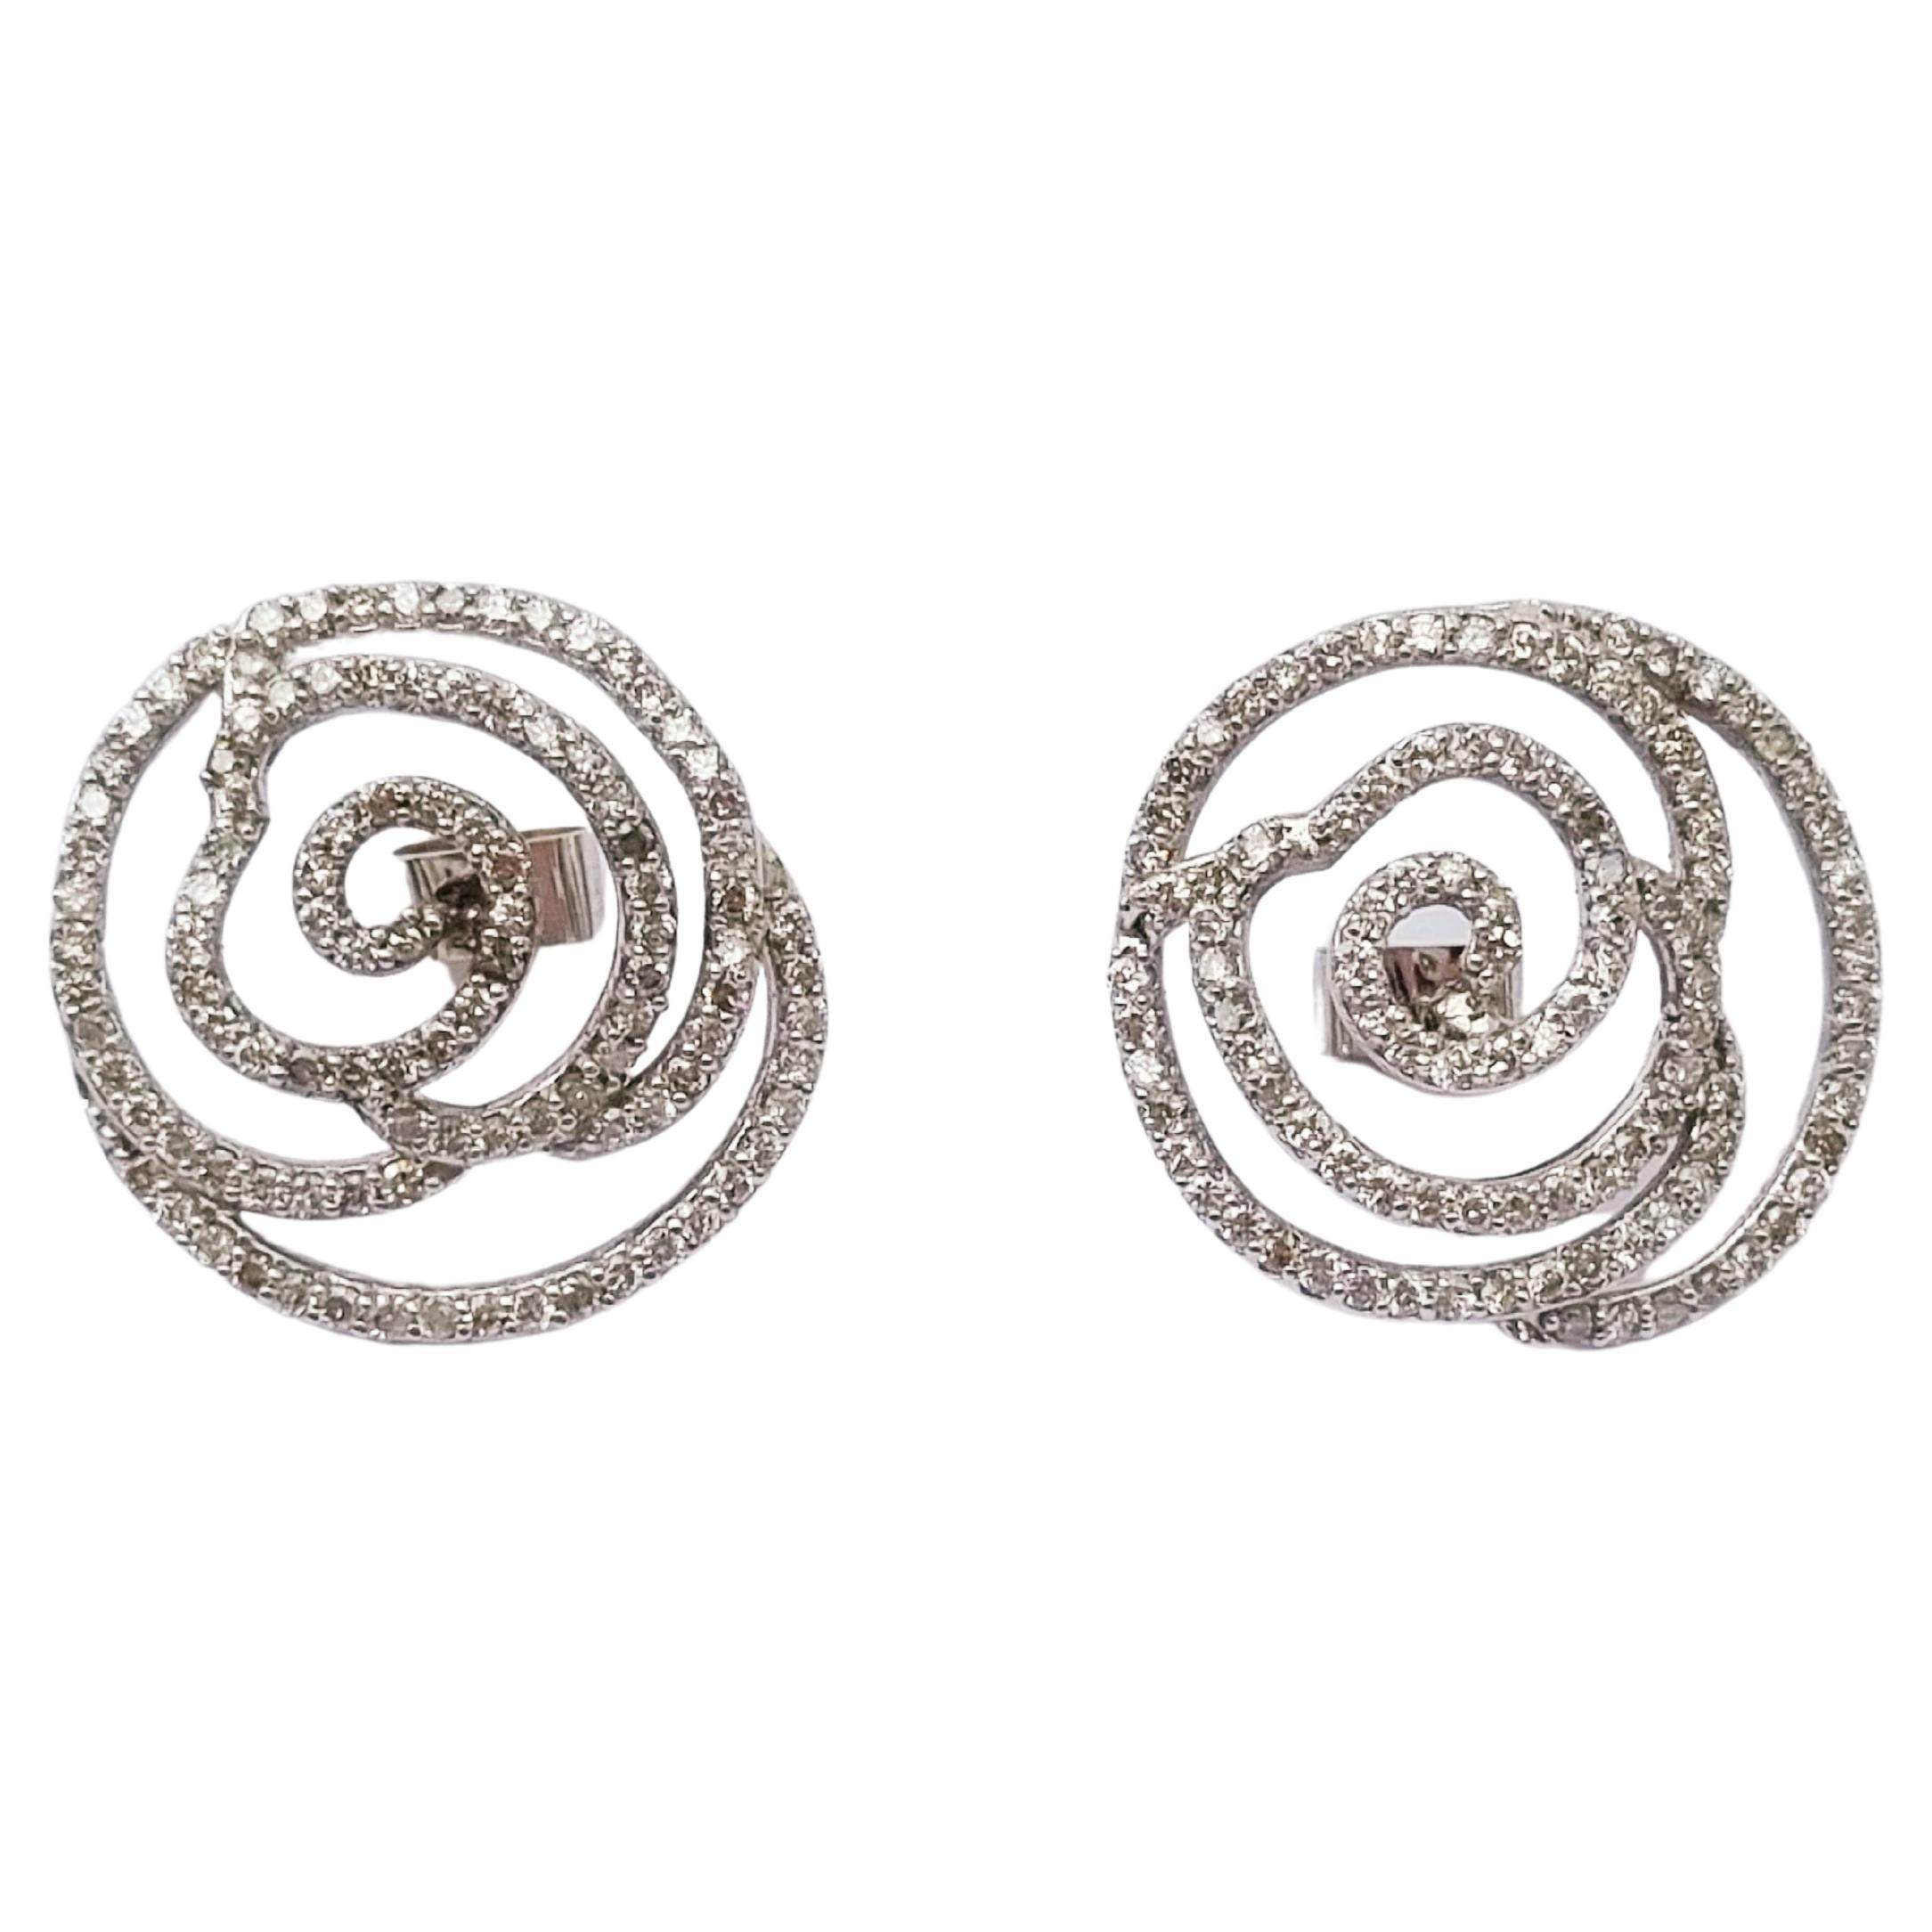 2, 63 Ct Diamonds Pave Earrings, Floral Stud Earrings, 18k Solid White Gold